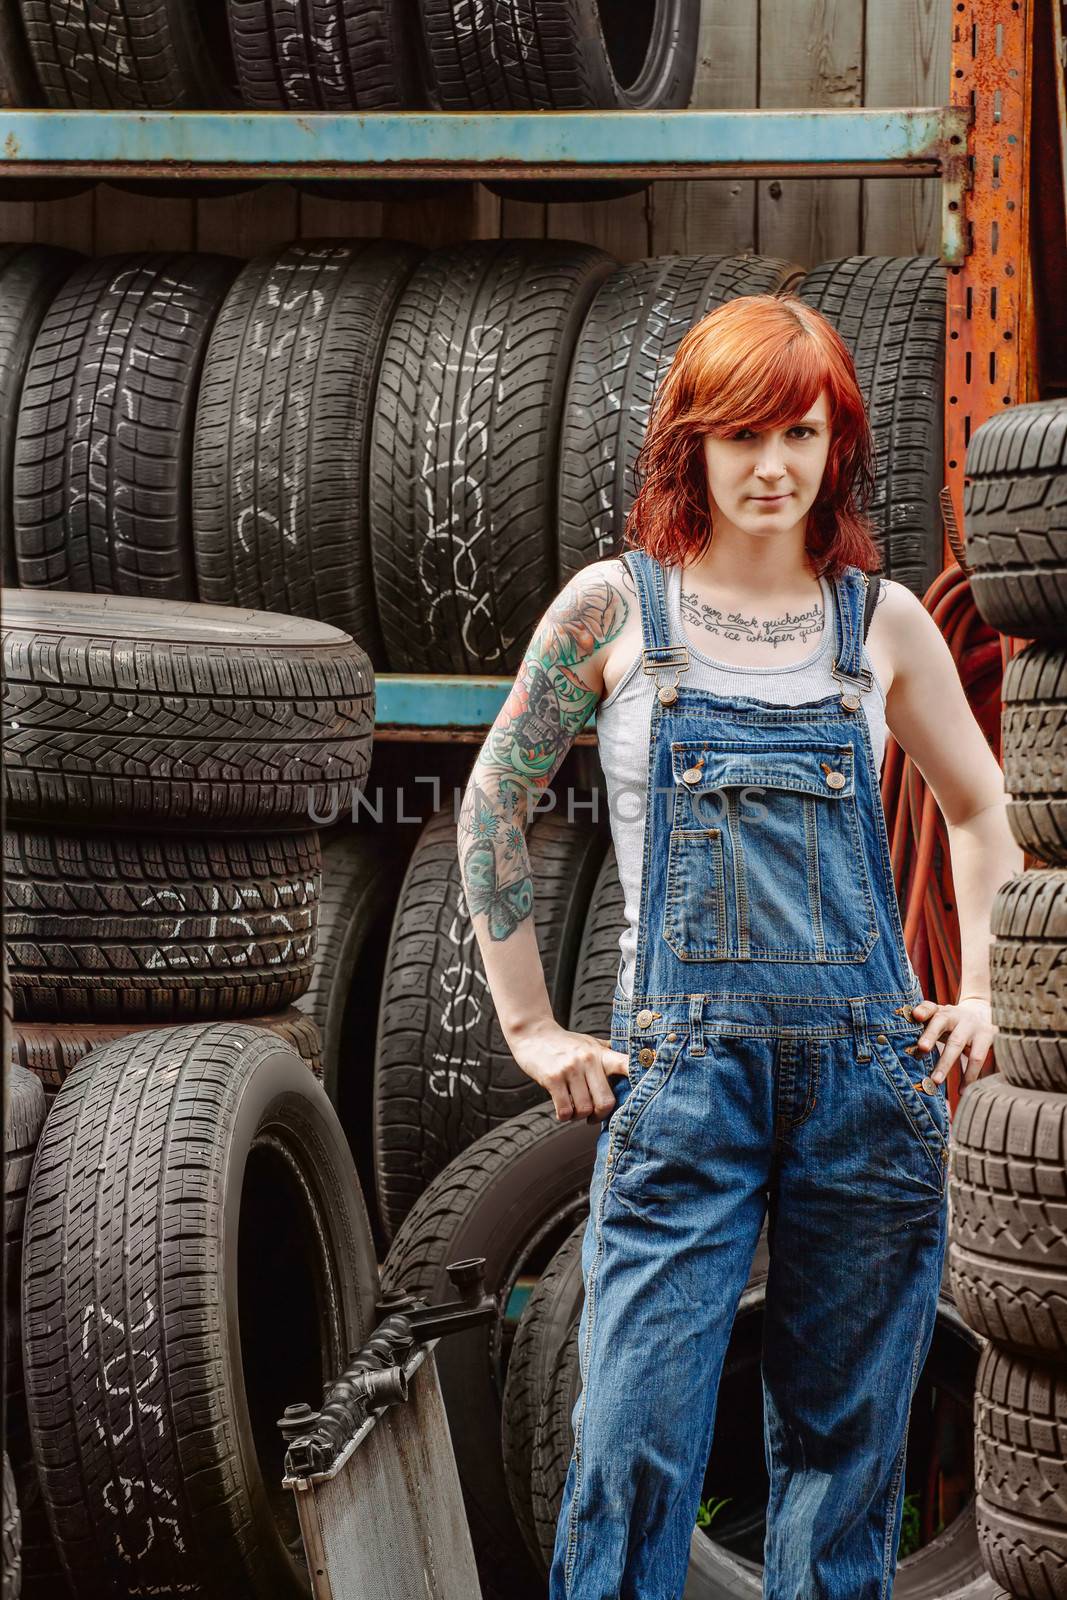 Photo of a young beautiful redhead mechanic wearing overalls and standing in an old garage. Attached property release is for arm tattoos.
